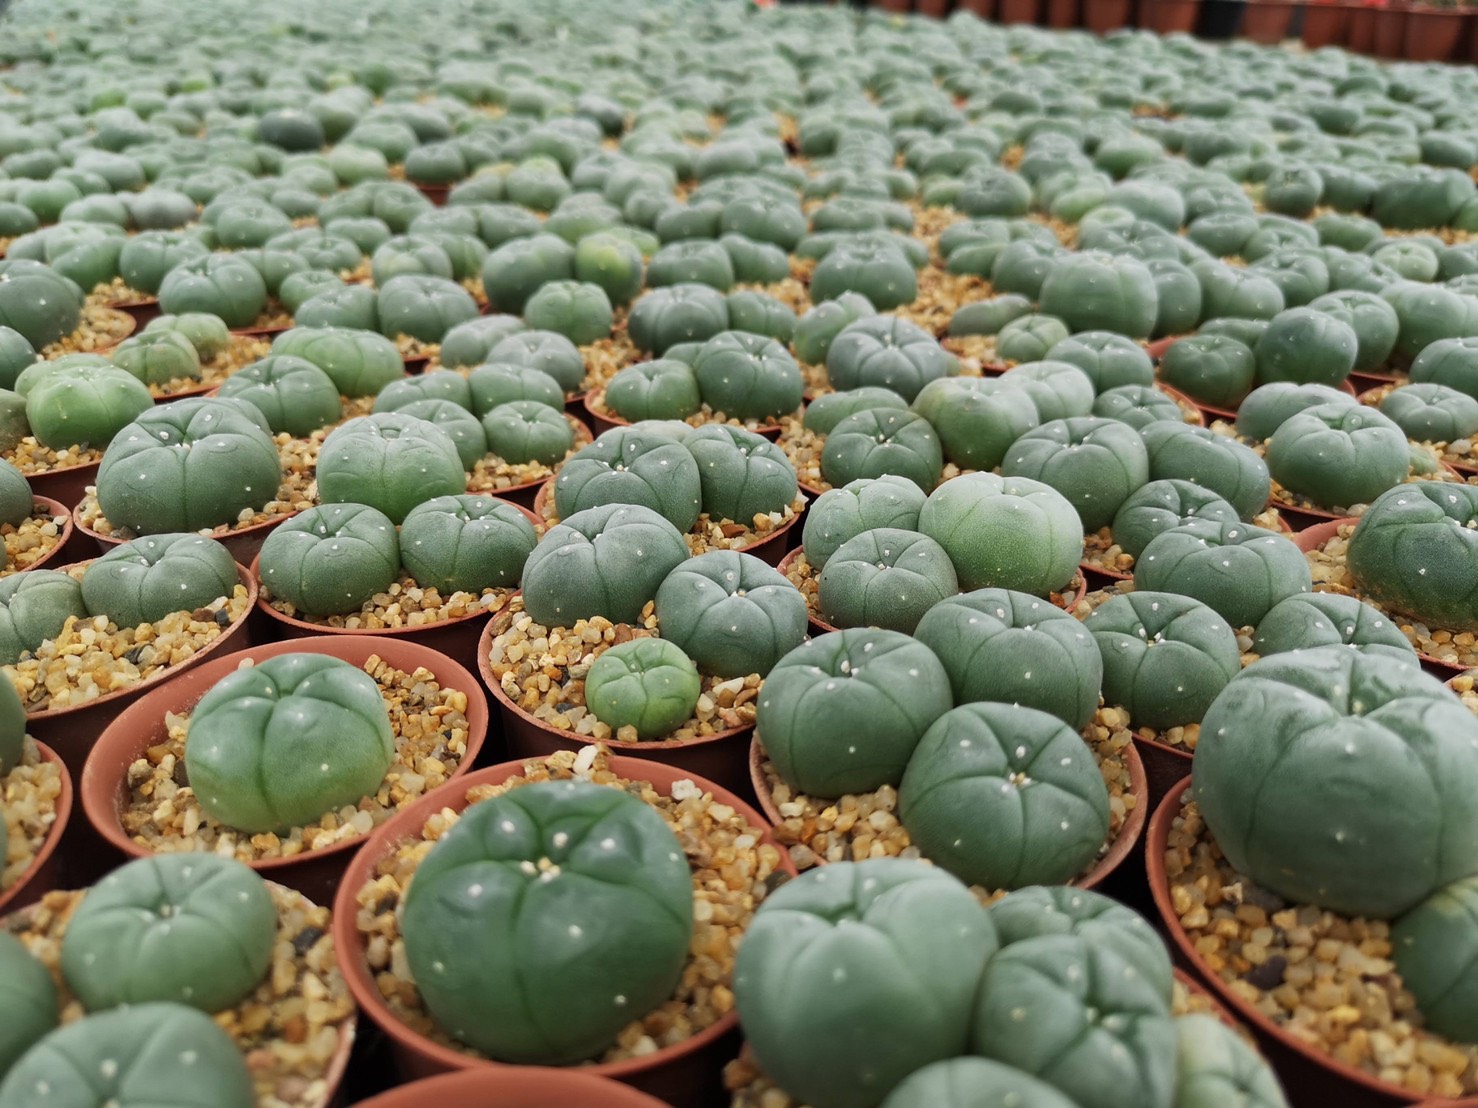 Athiwat Chakpan grows his Lophophora cactuses in a greenhouse. (Photo: Cactus Inter)